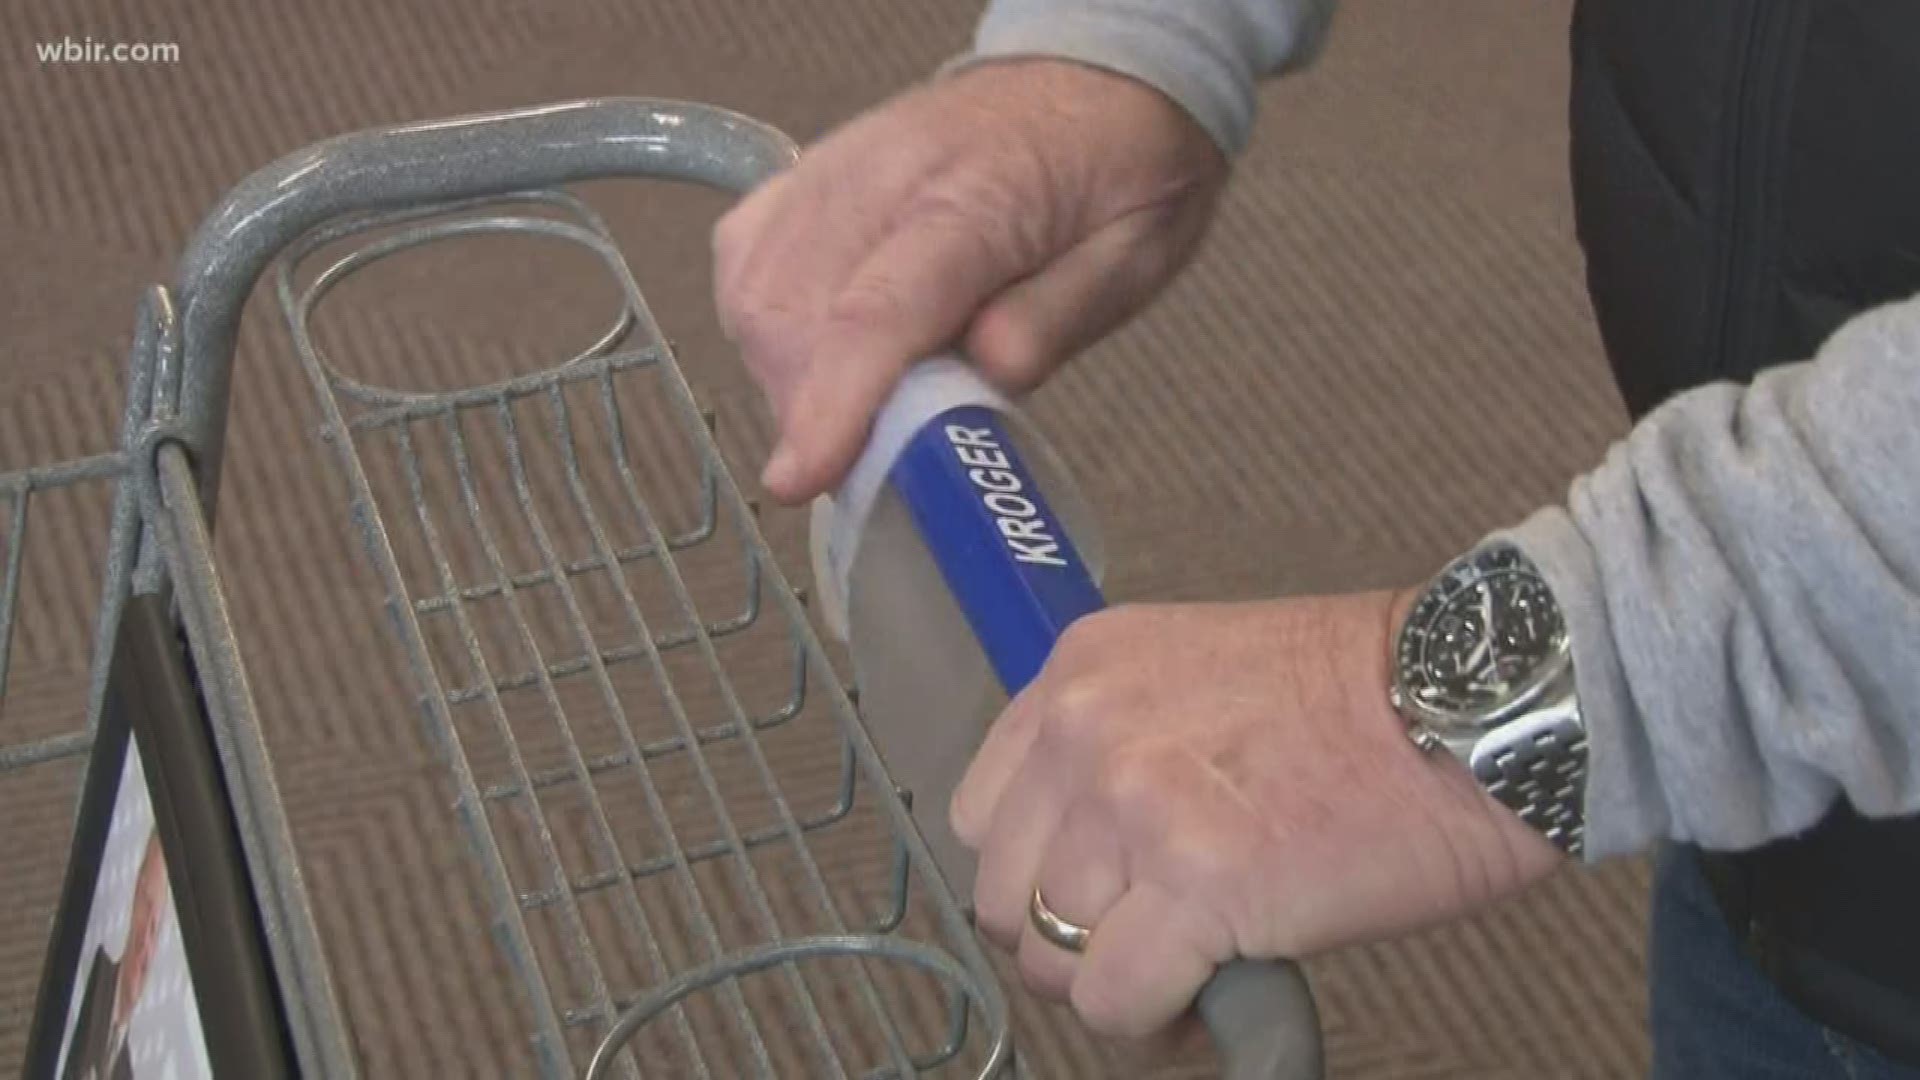 Many stores now provide disinfectant wipes to help decrease germs on shopping carts. Does it really work?